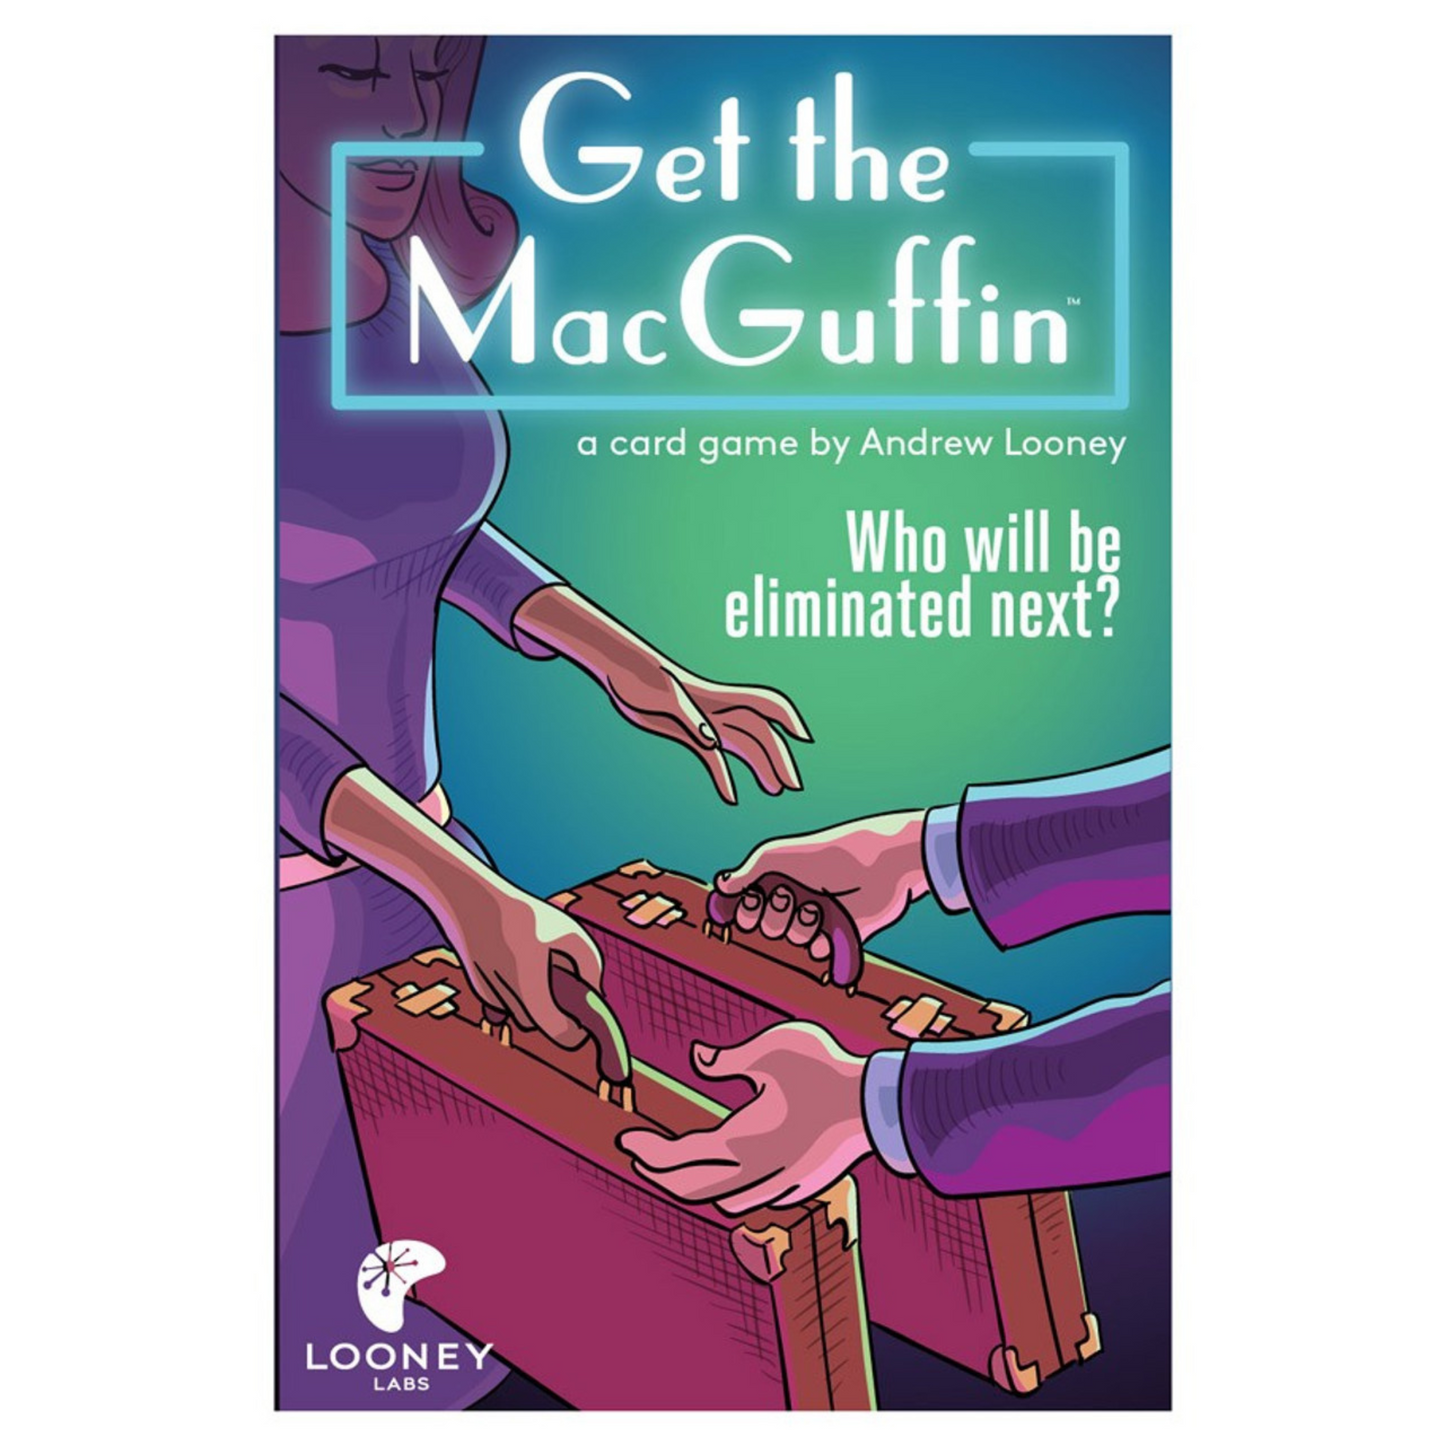 Get the Macguffin